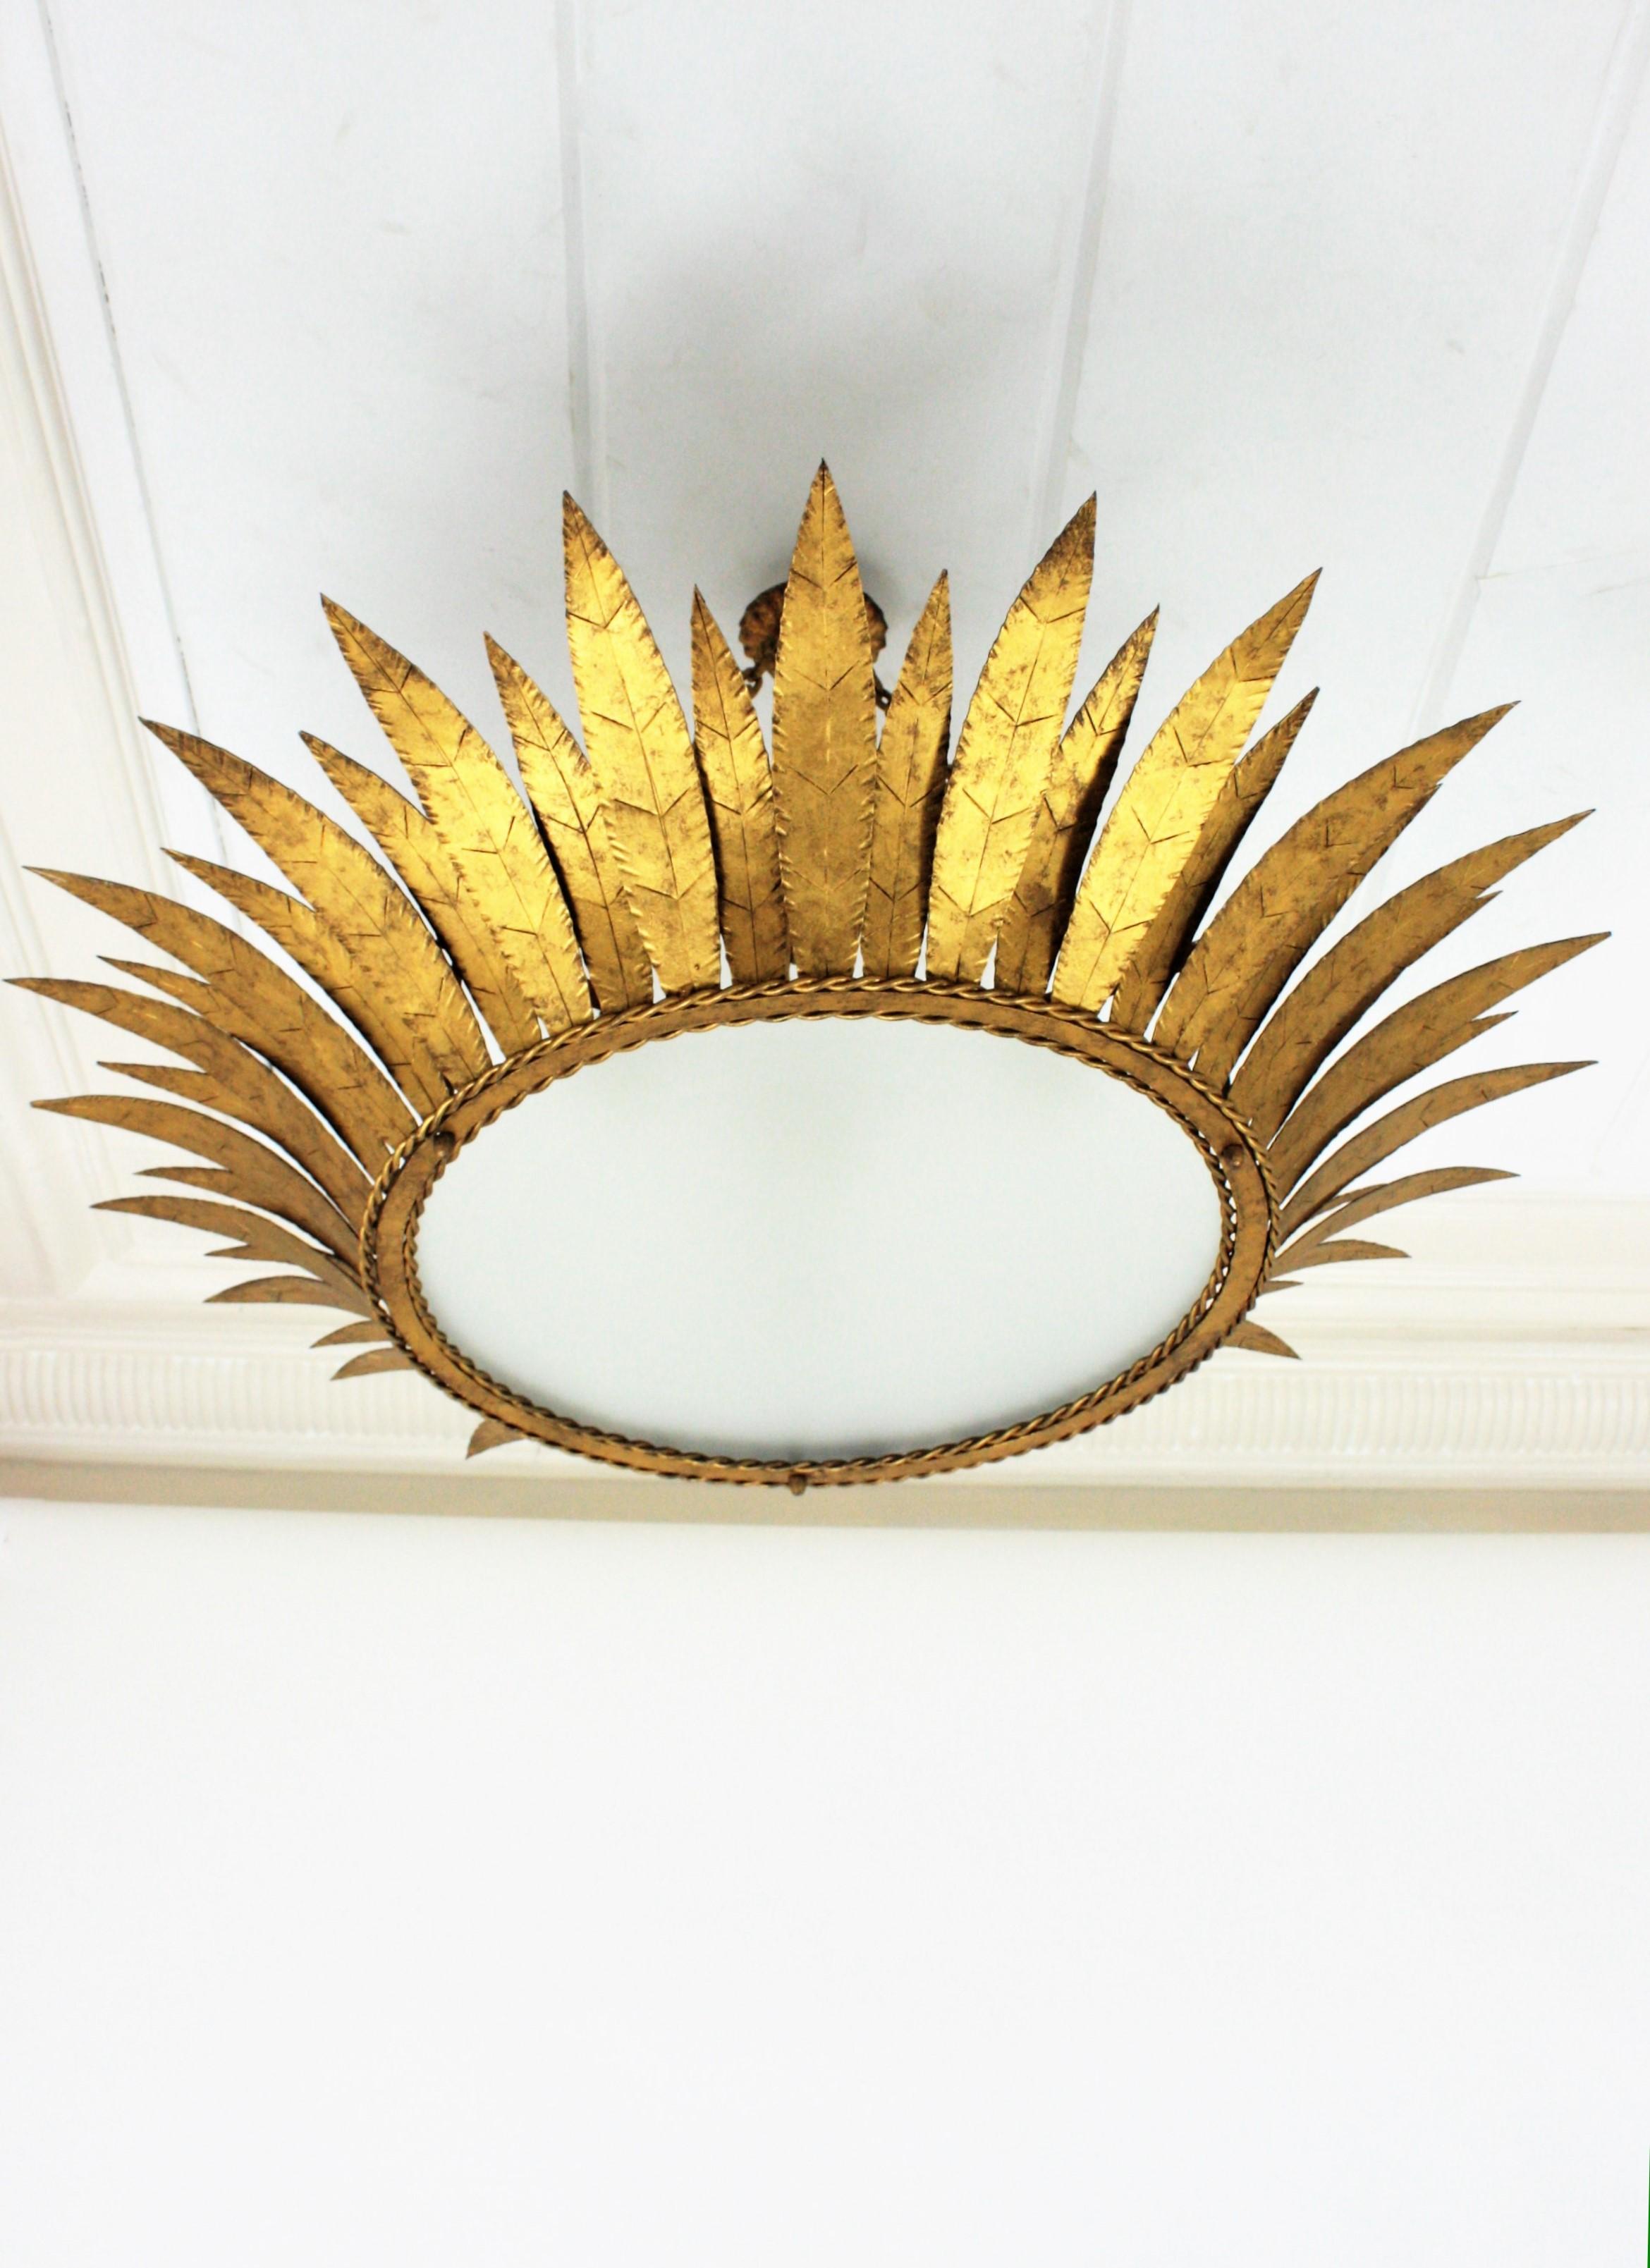 Monumental Sunburst crown chandelier / ceiling light fixture, Spain, 1950s
This outstanding crown ceiling lamp features a leafed frame in sunburst disposition surrounding a central frosted glass panel to difusse the light.
It can be placed flush